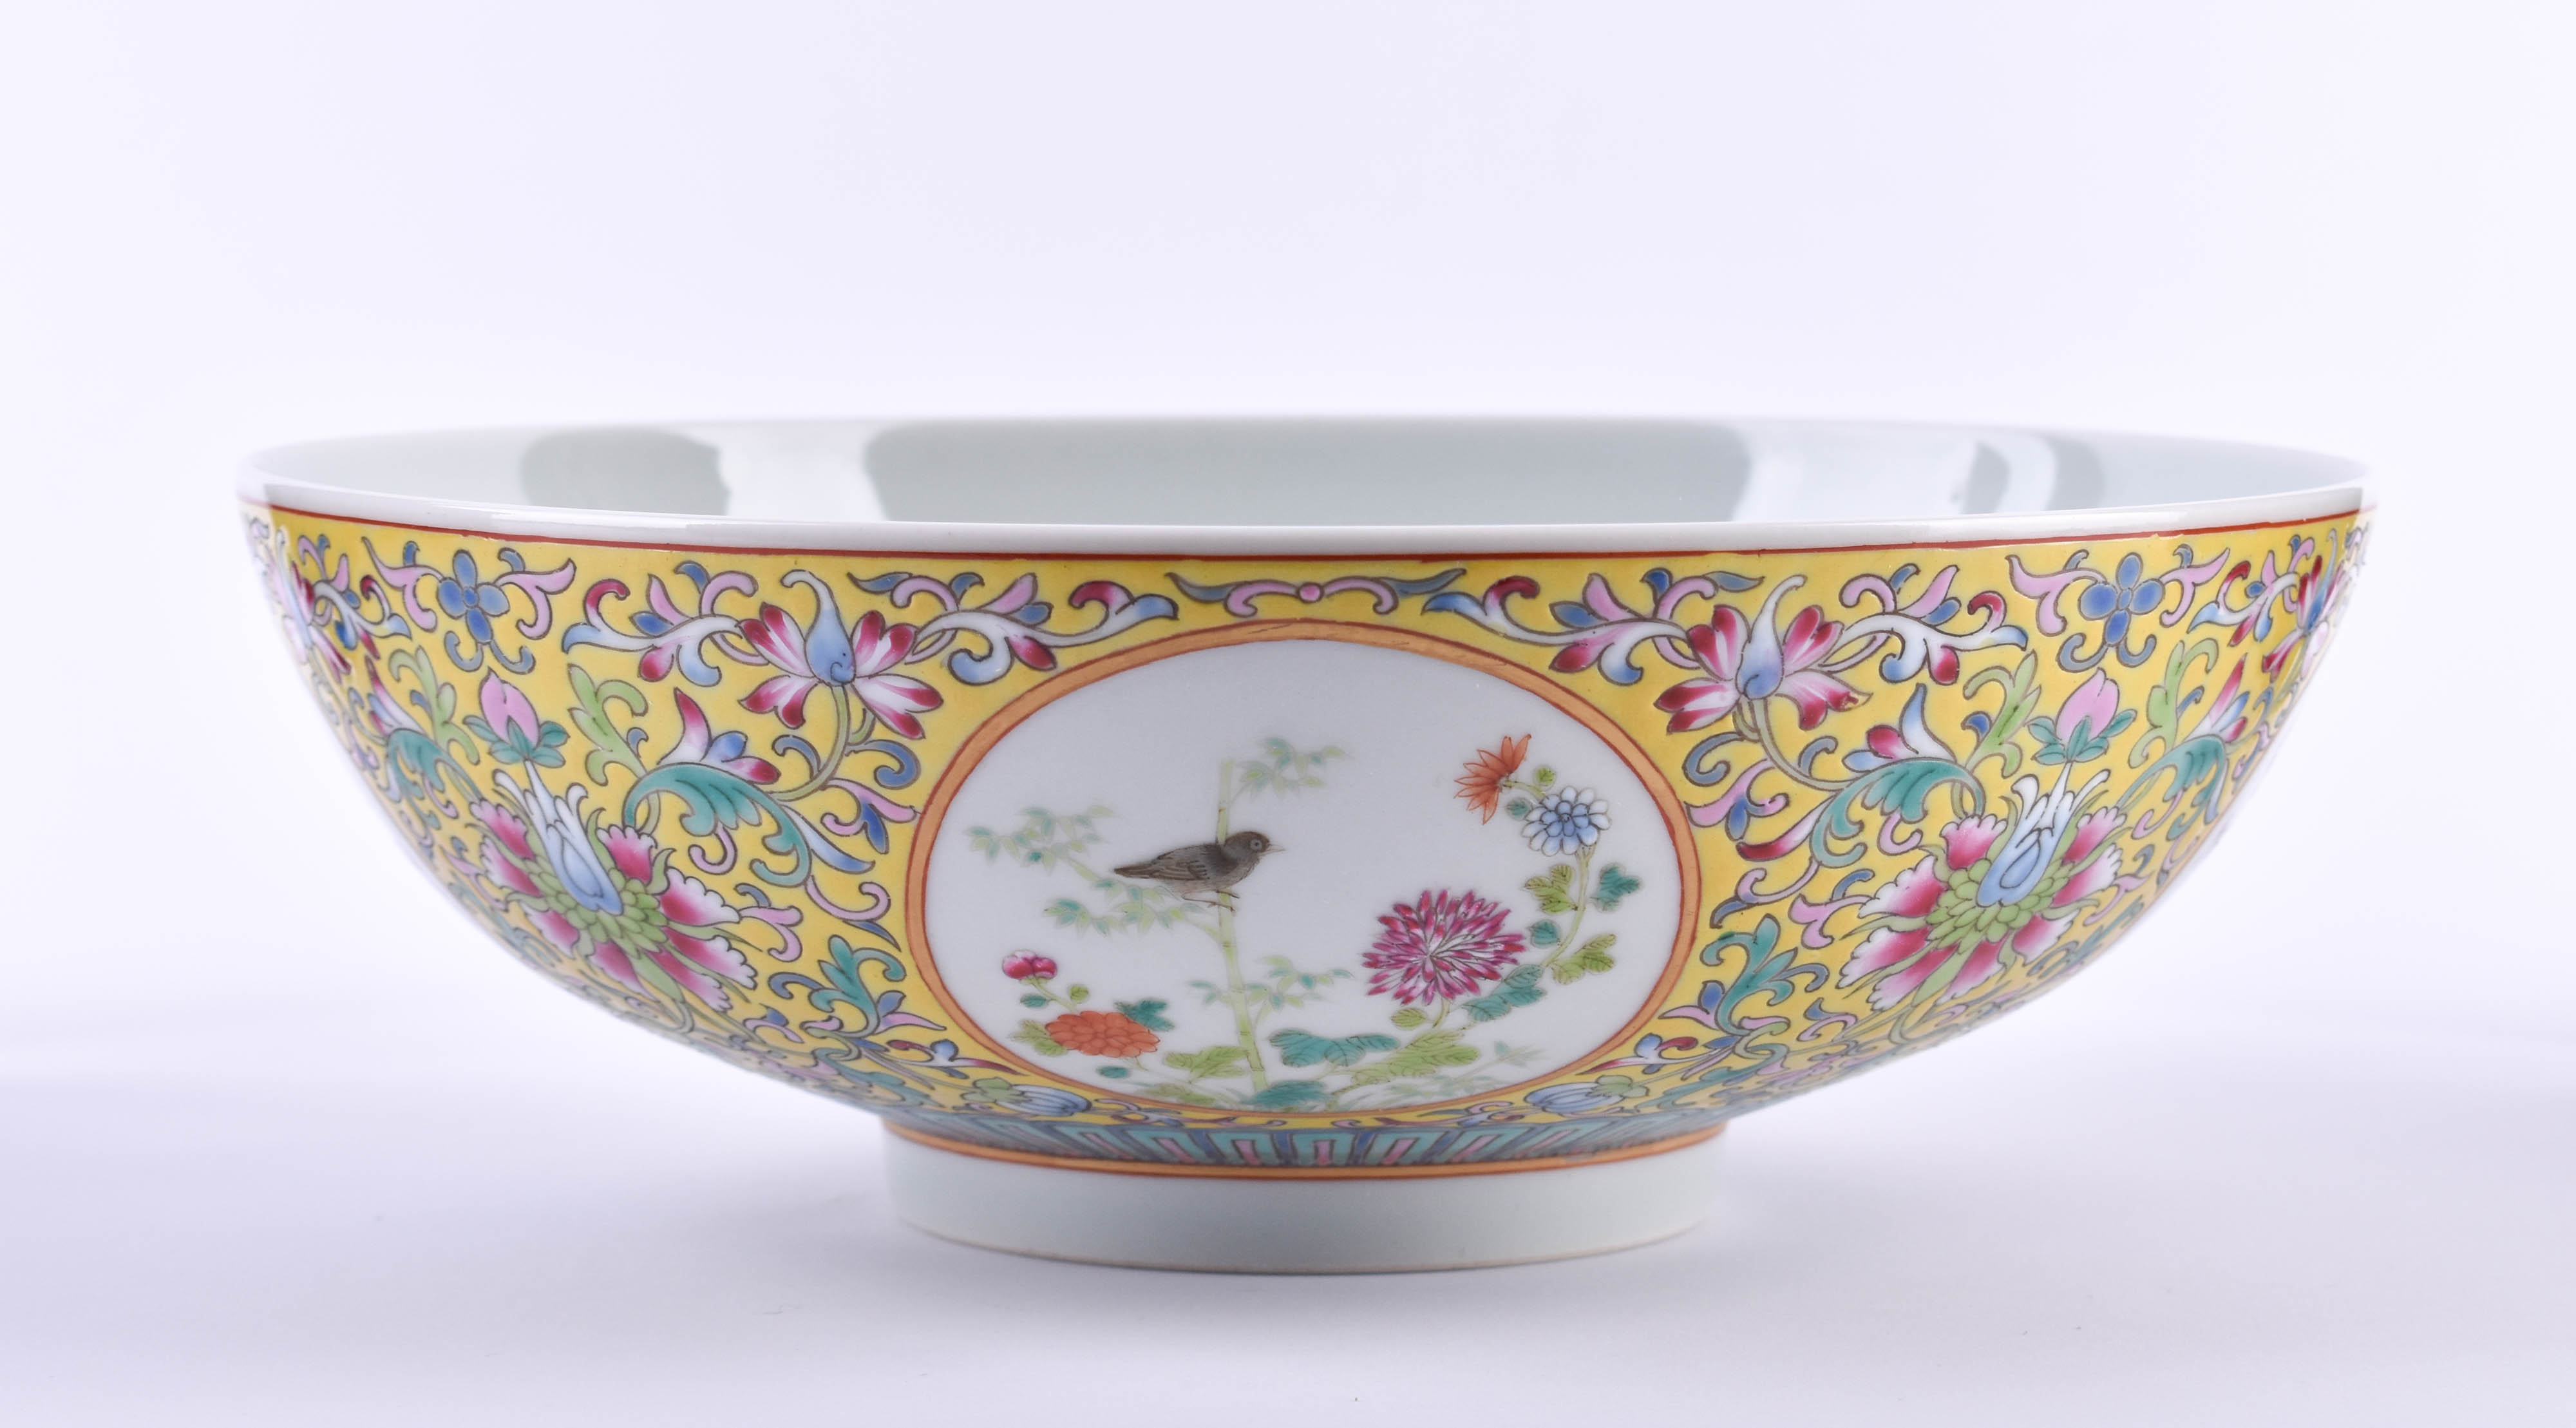  Famille rose bowl late Qing dynasty - Image 8 of 12